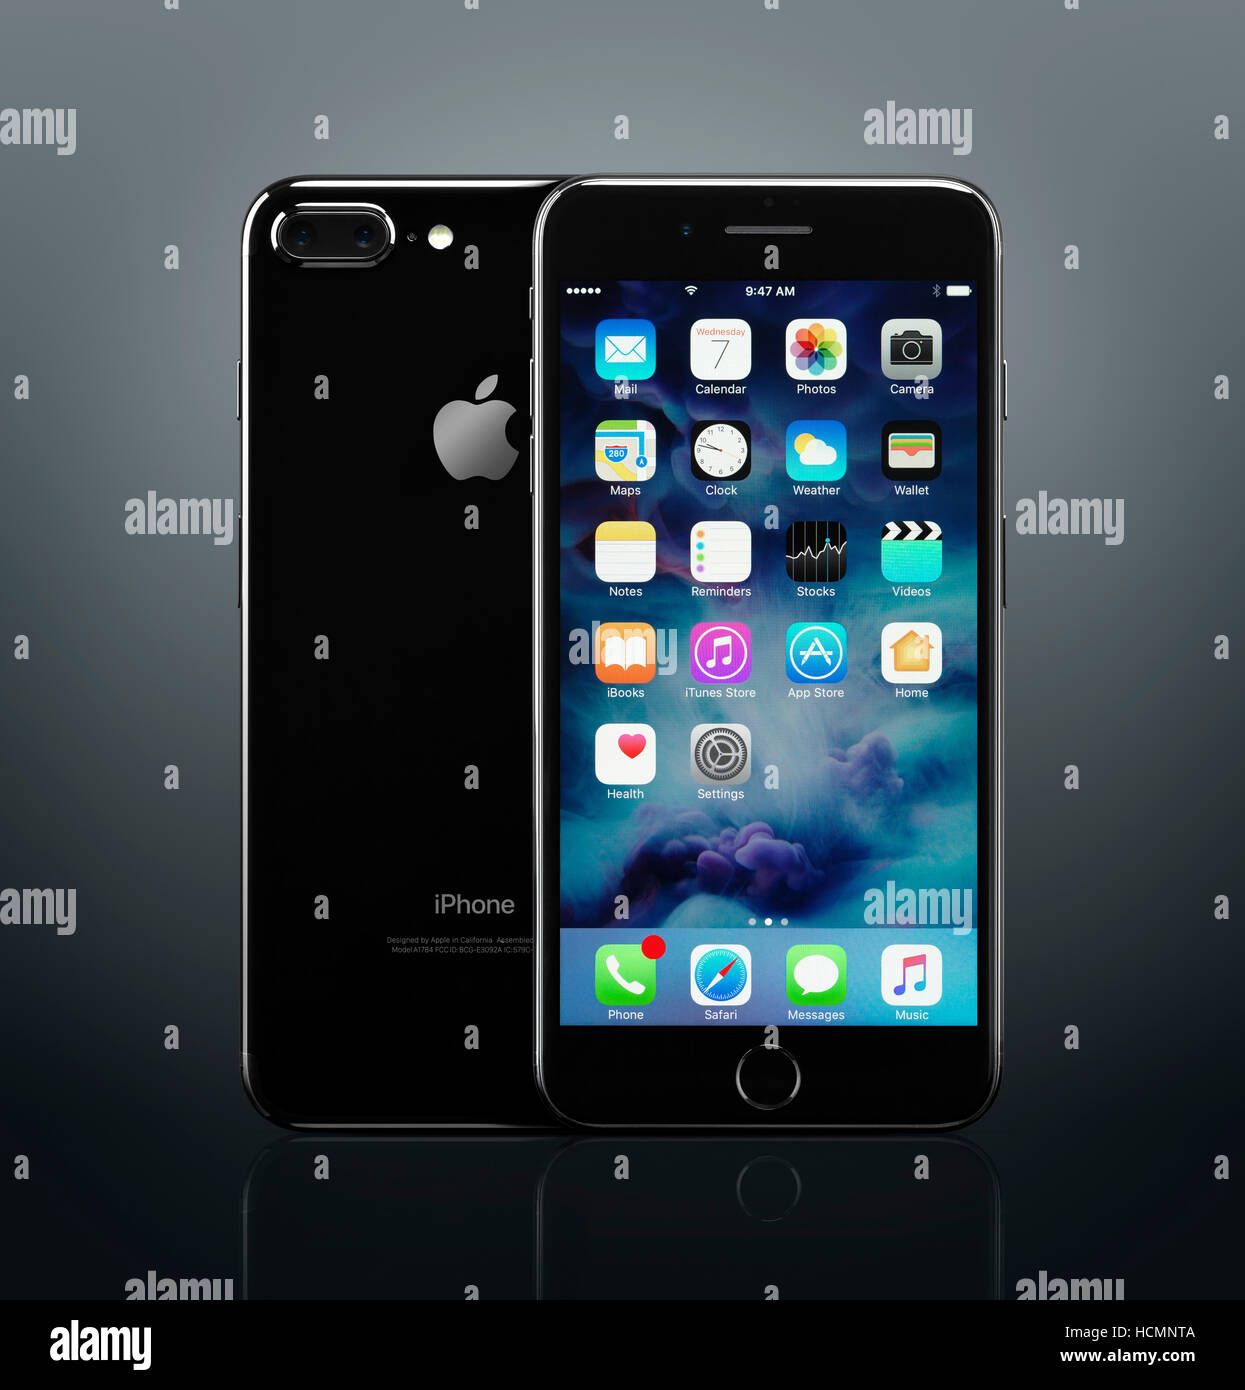 Apple Iphone 7 Plus Black Front And Back With Desktop Icons On Its Display Isolated On Dark Gray Background Stock Photo Alamy